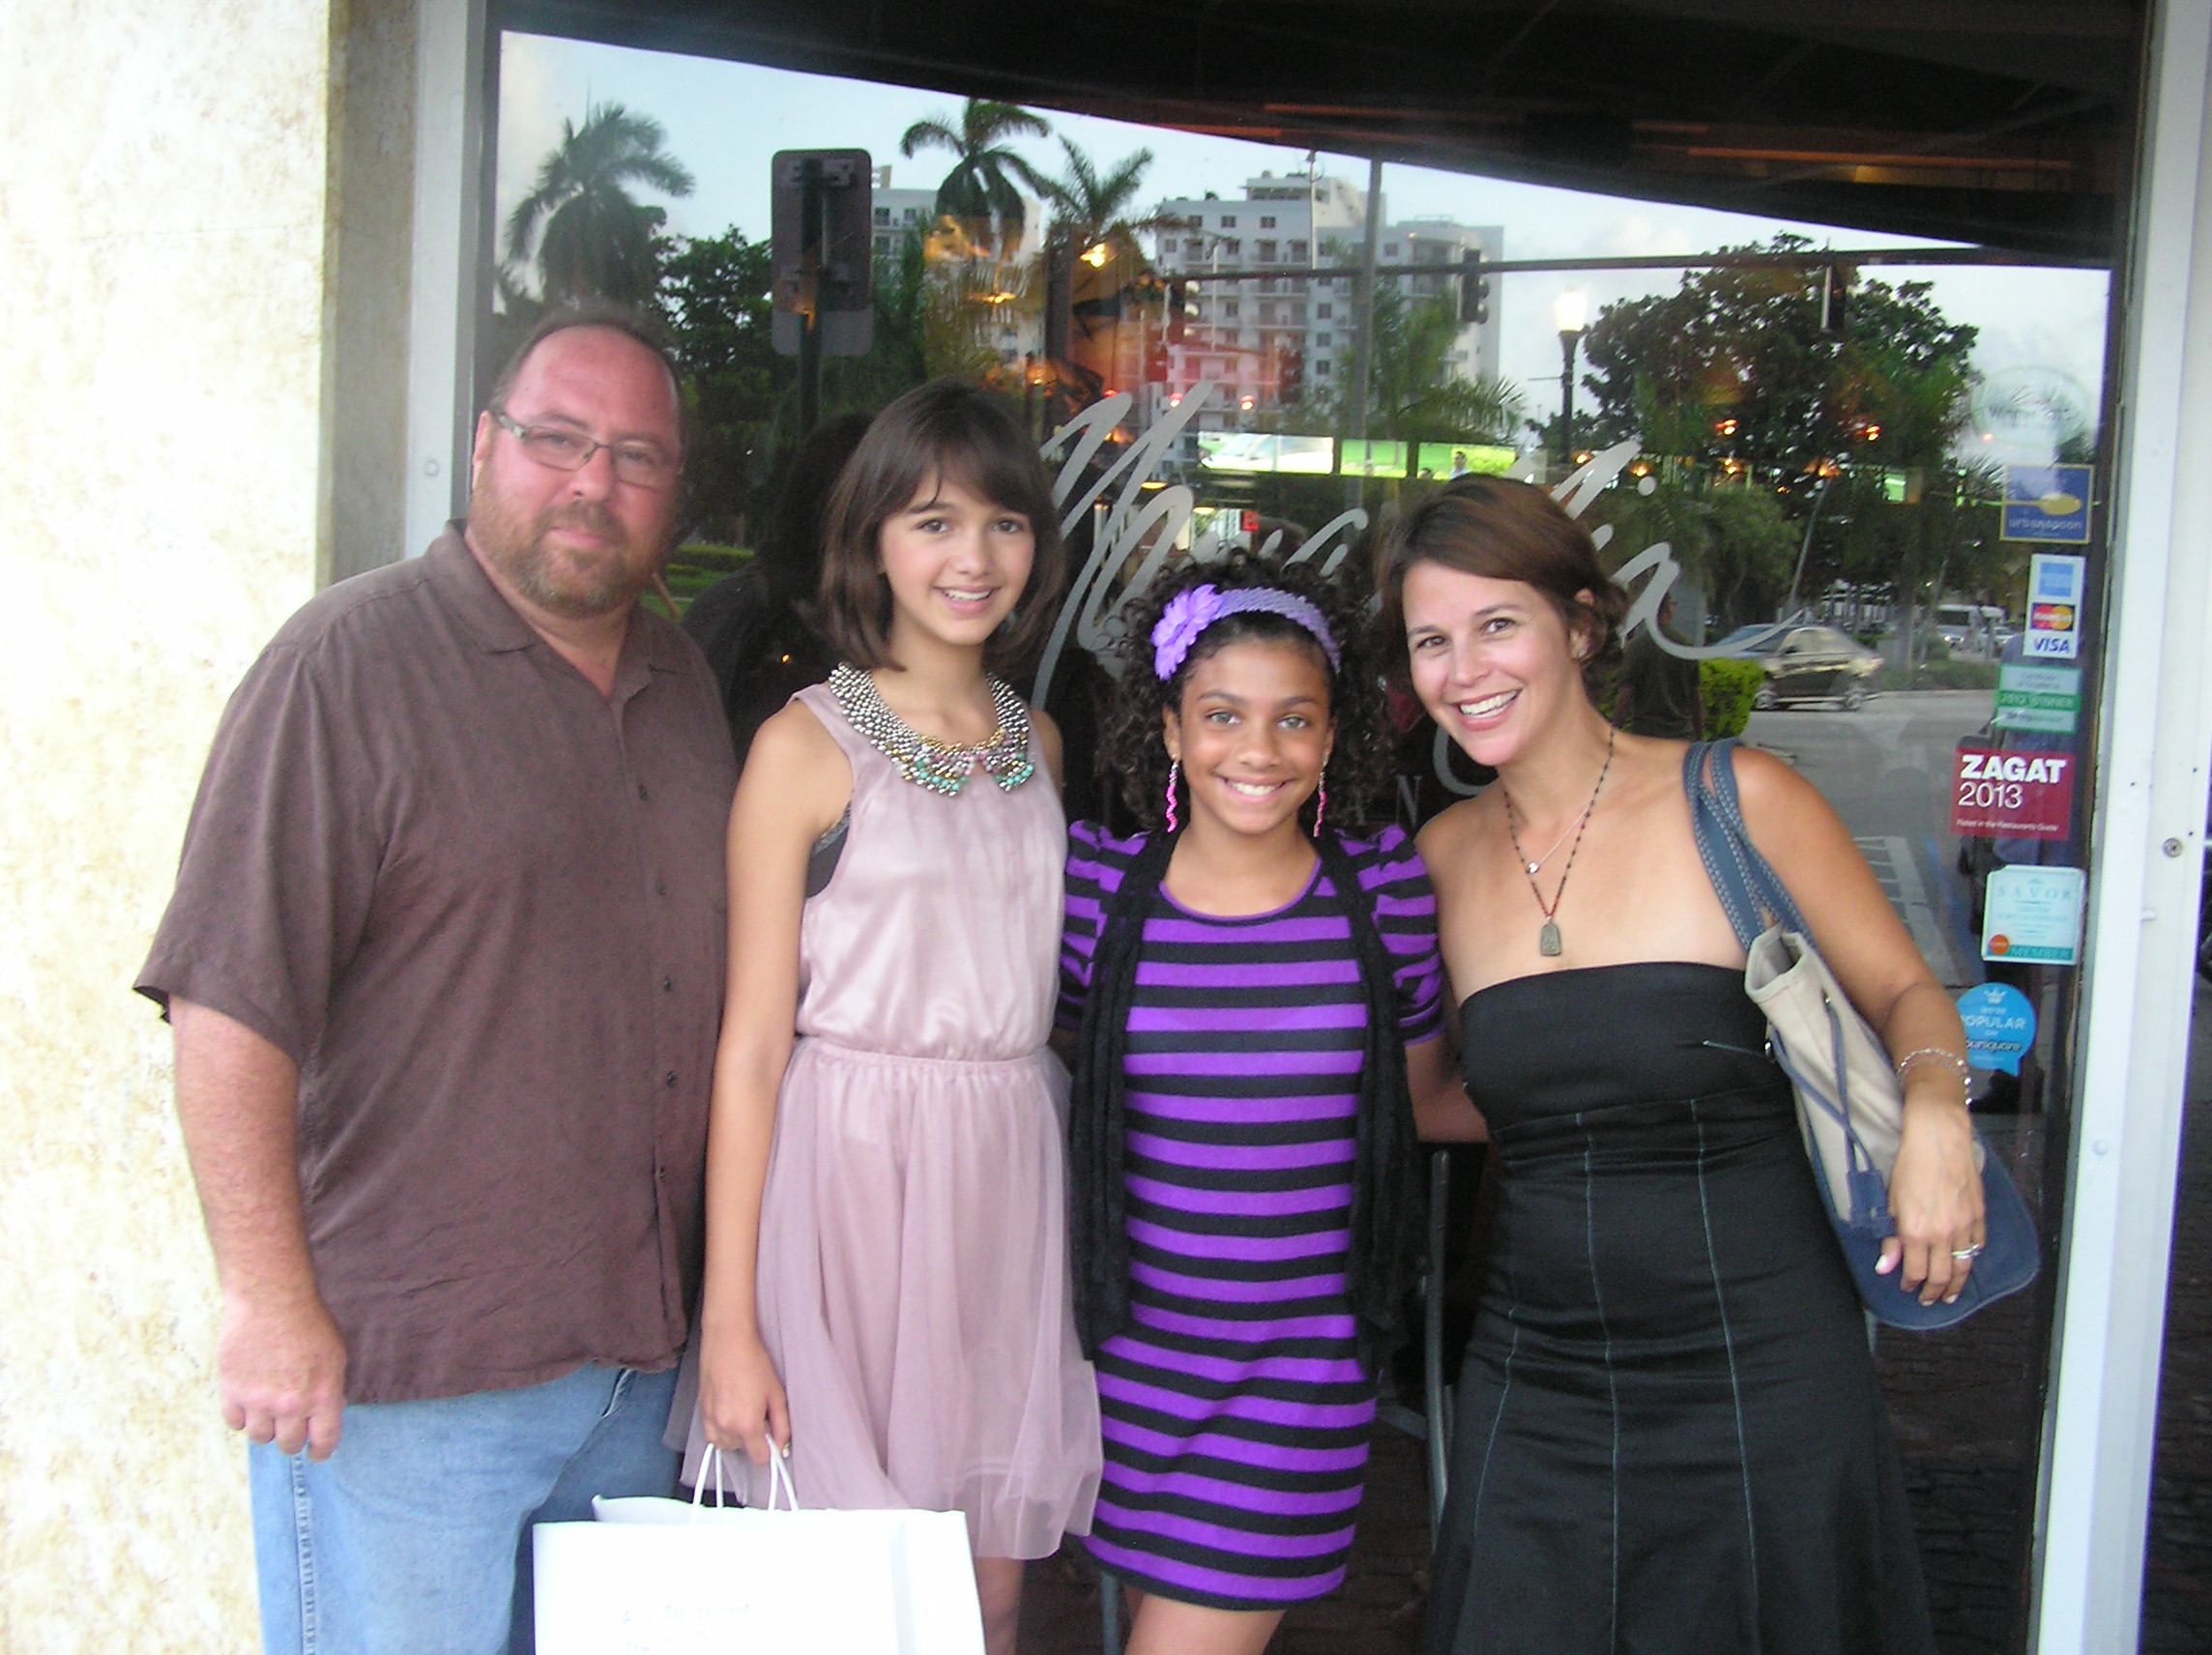 Taylor Blackwell & Meredith Blackwell , my daughter Gina and myself. Magic City wrap party 2013.